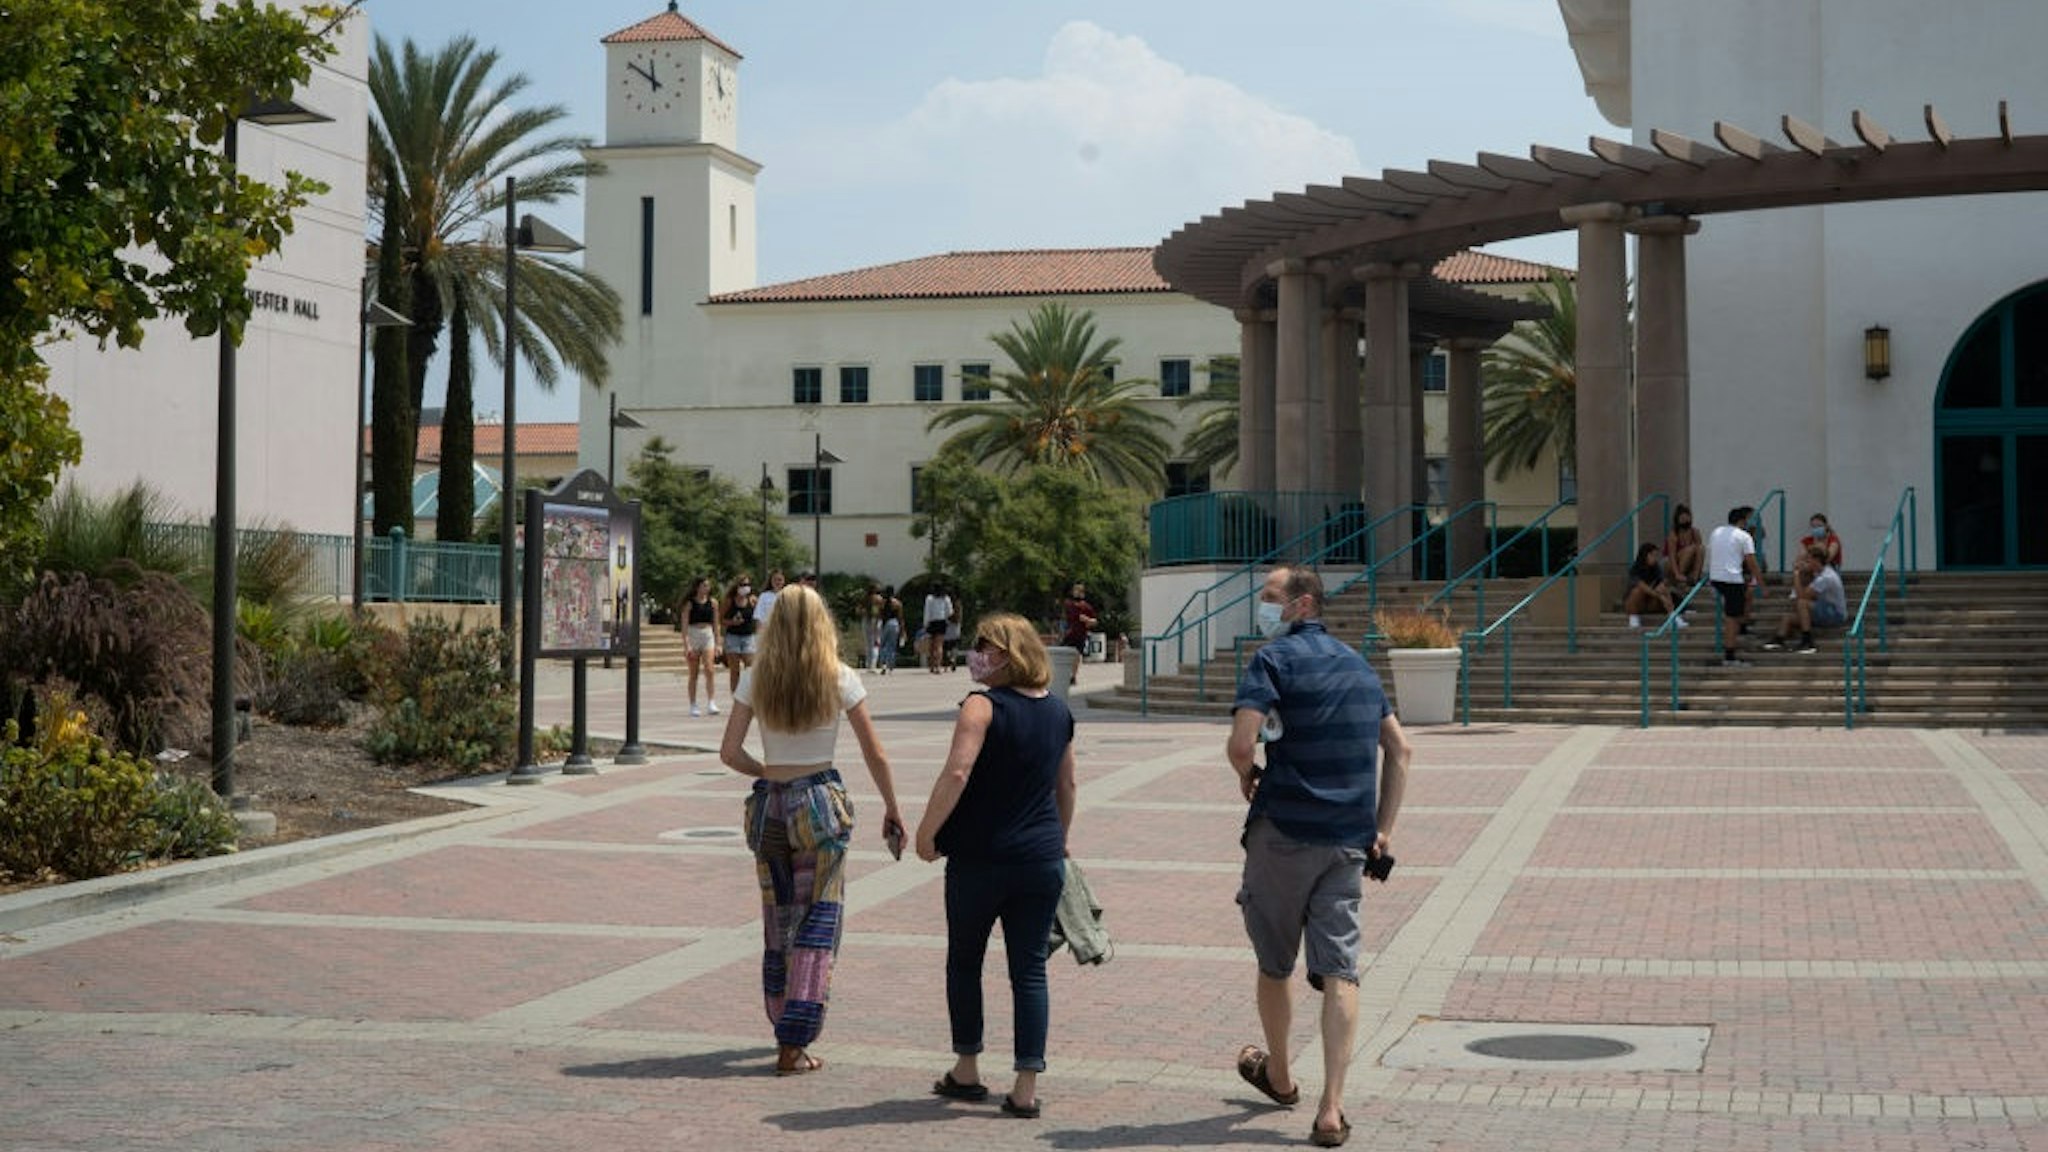 Students and parents walk on campus during move-in day at San Diego State University in San Diego, California, U.S., on Friday, Aug. 21, 2020.